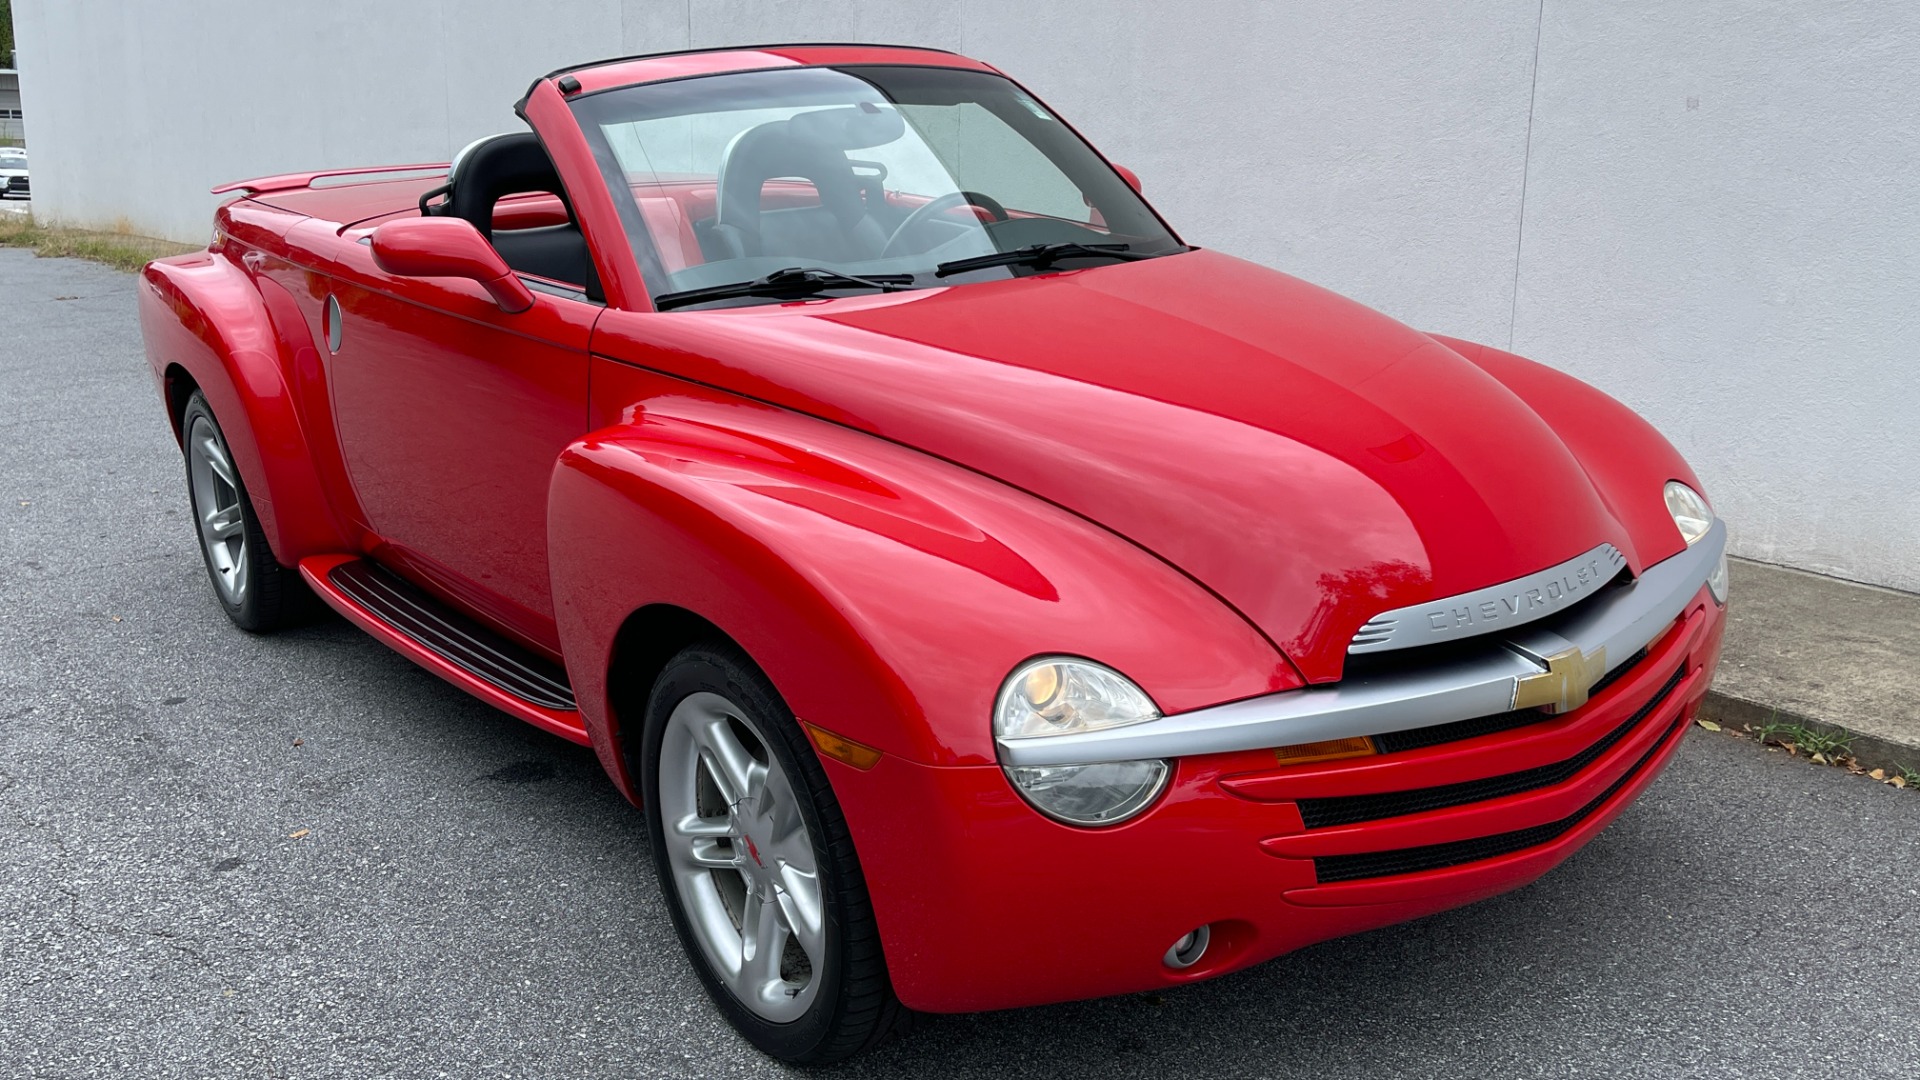 Used 2004 Chevrolet SSR LS / CONVERTIBLE / 5.3L V8 / LEATHER / HEATED SEATS / BACKUP CAMERA for sale Sold at Formula Imports in Charlotte NC 28227 8